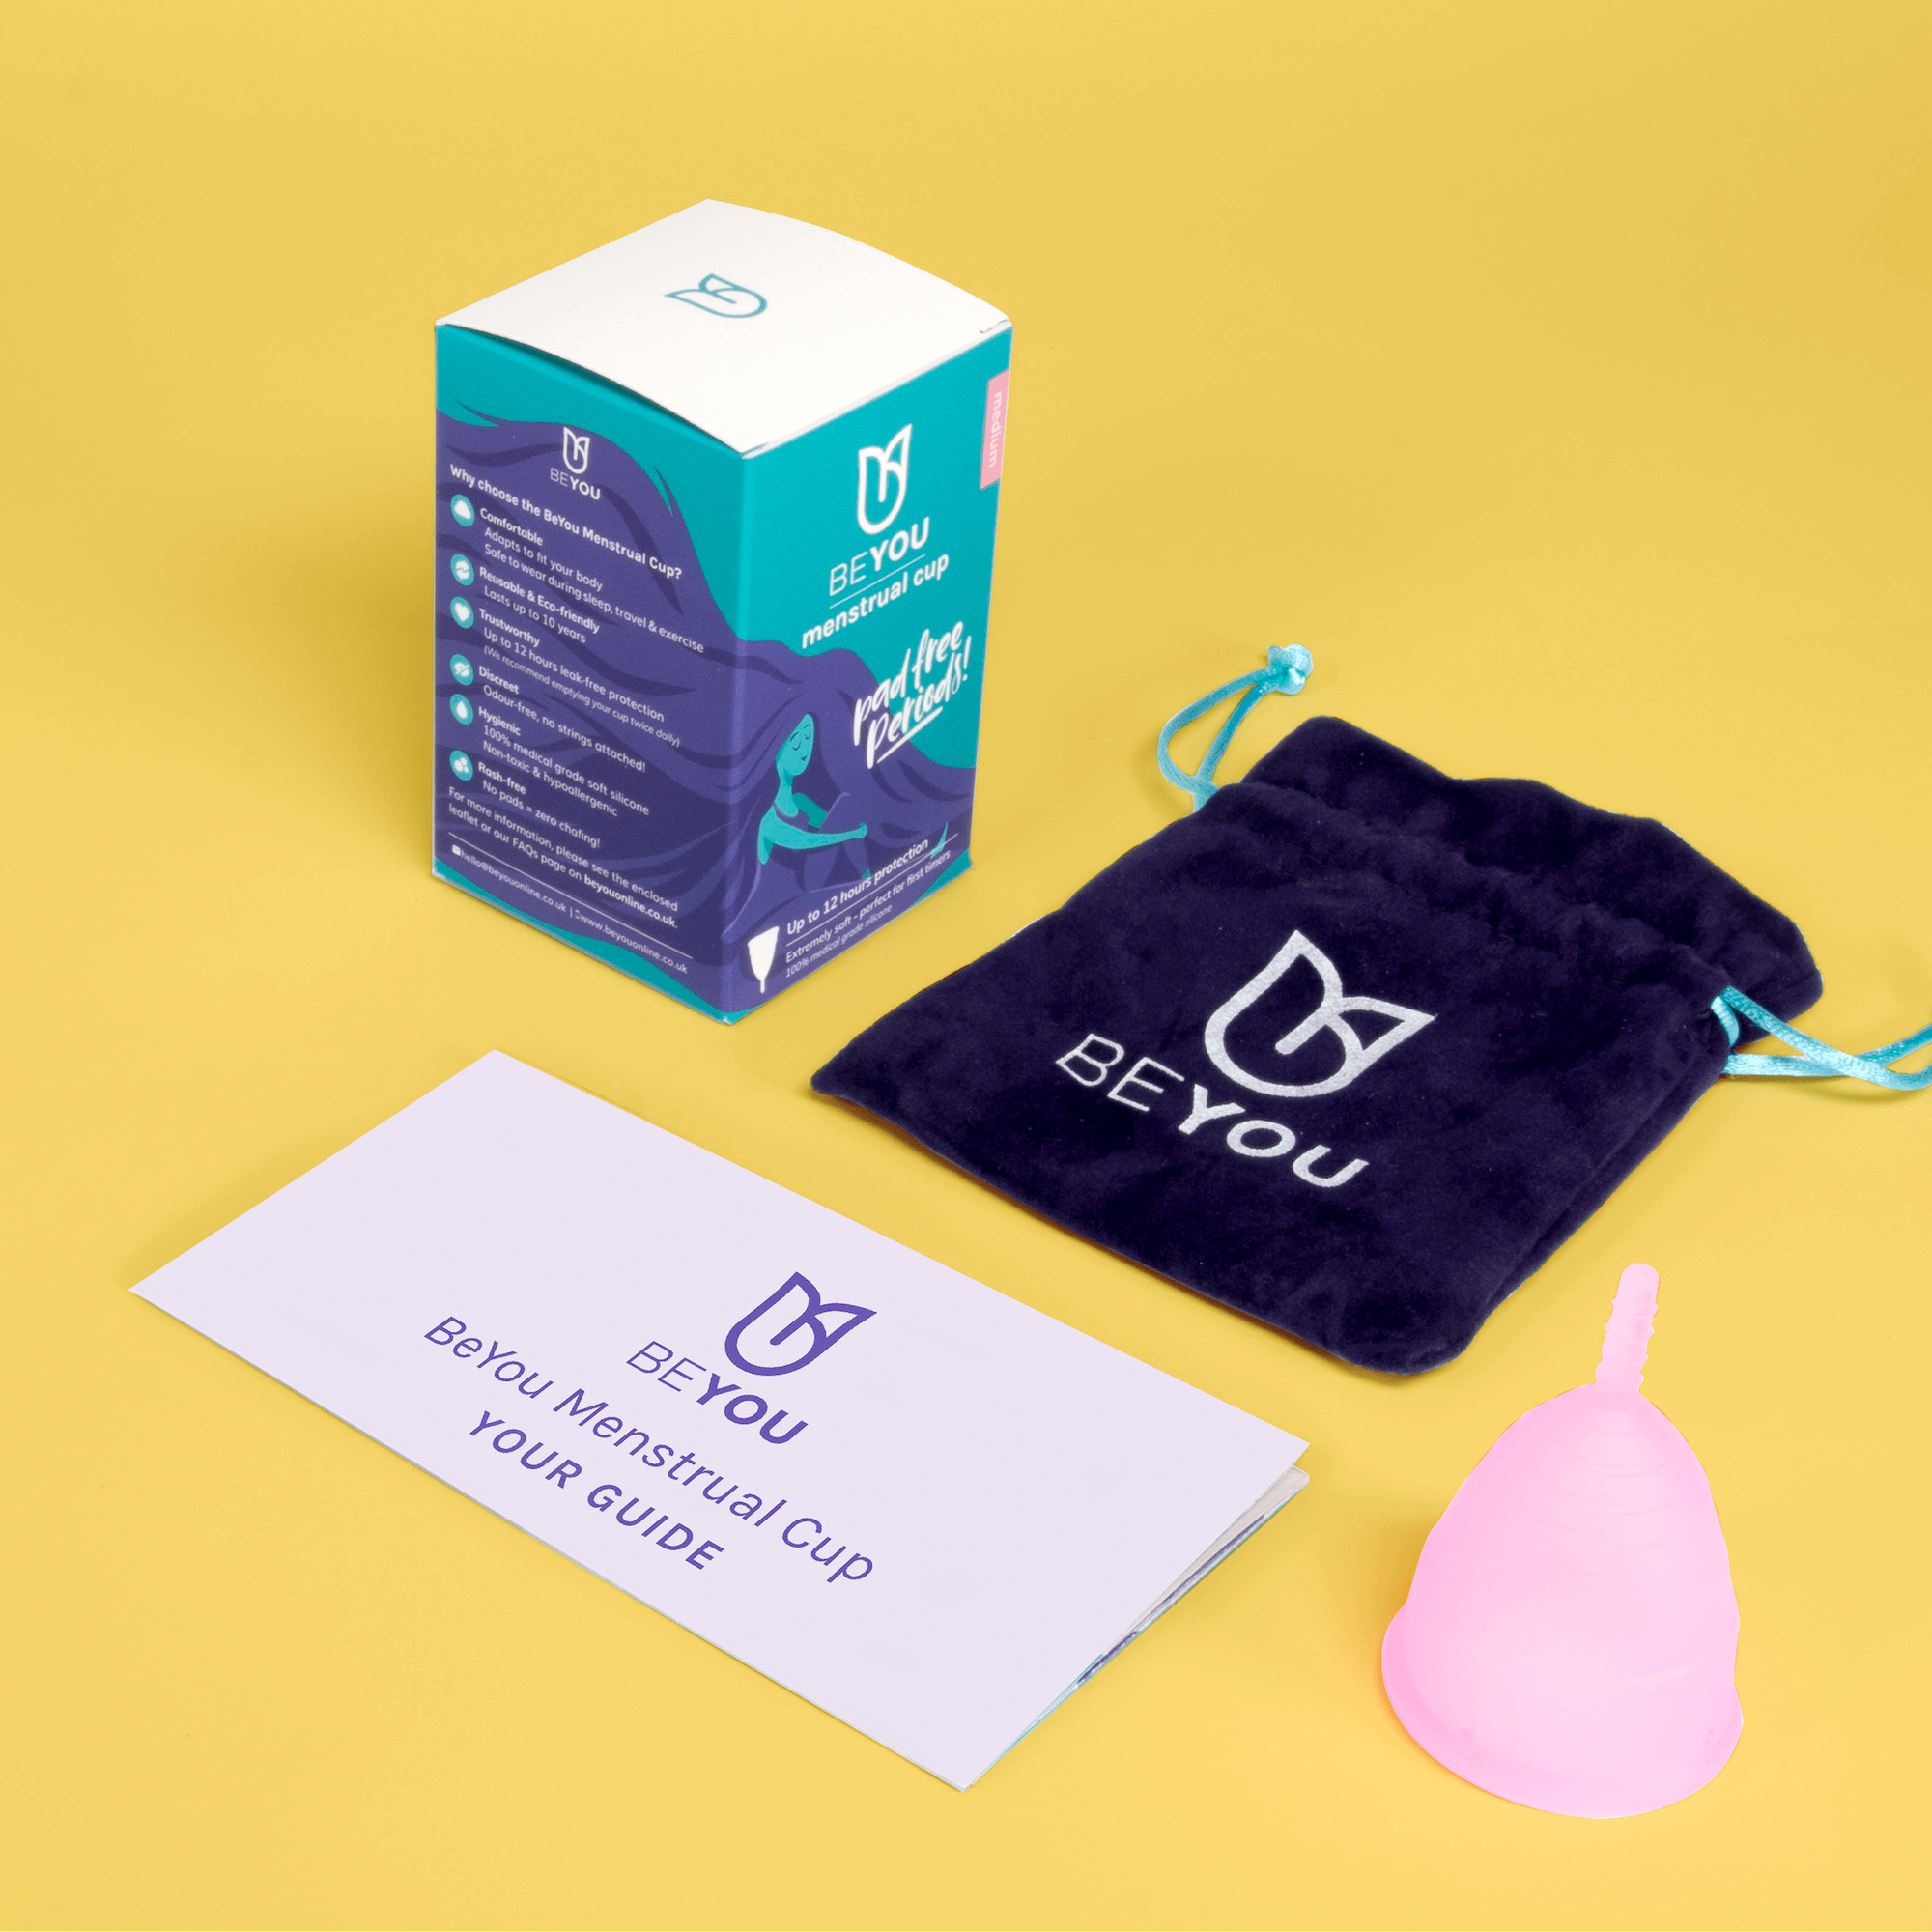 menstrual cup comes with a carry pouch and a guide